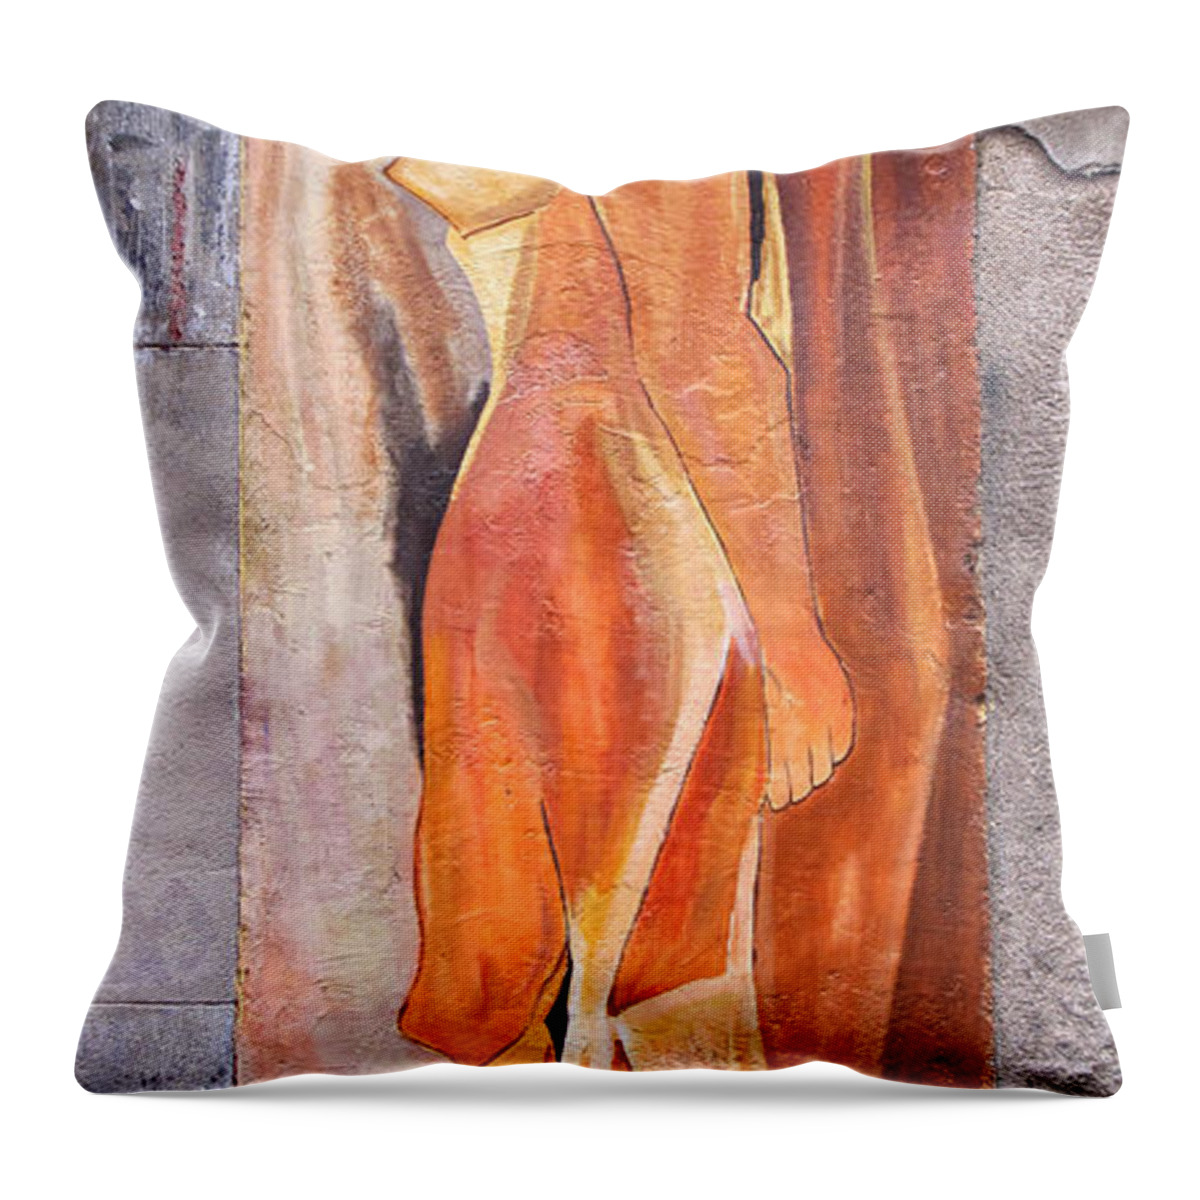 Barcelona Throw Pillow featuring the photograph Barcelona Street Art by Dave Mills